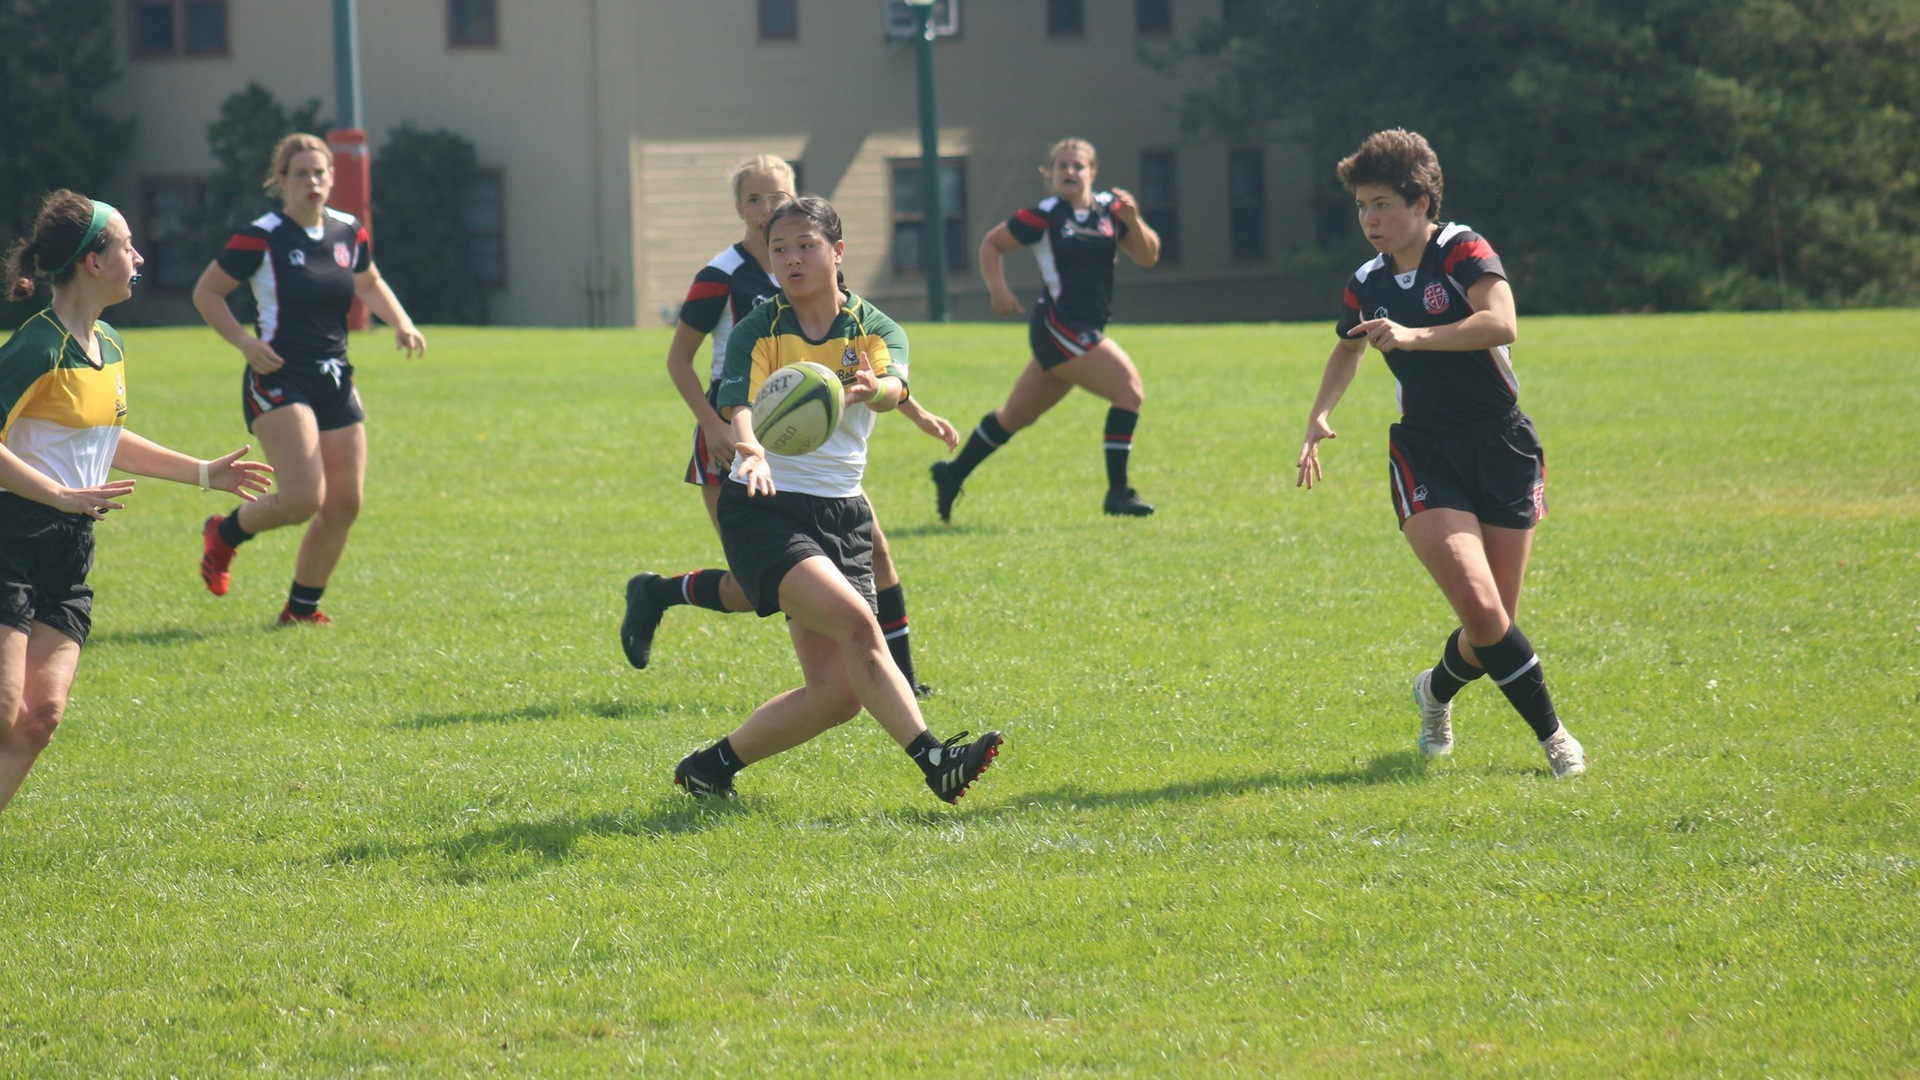 Kianna Hanson (center) initiates a pass to a teammate in a Rugby 10s matchup with SLU on Saturday. Thumbnail